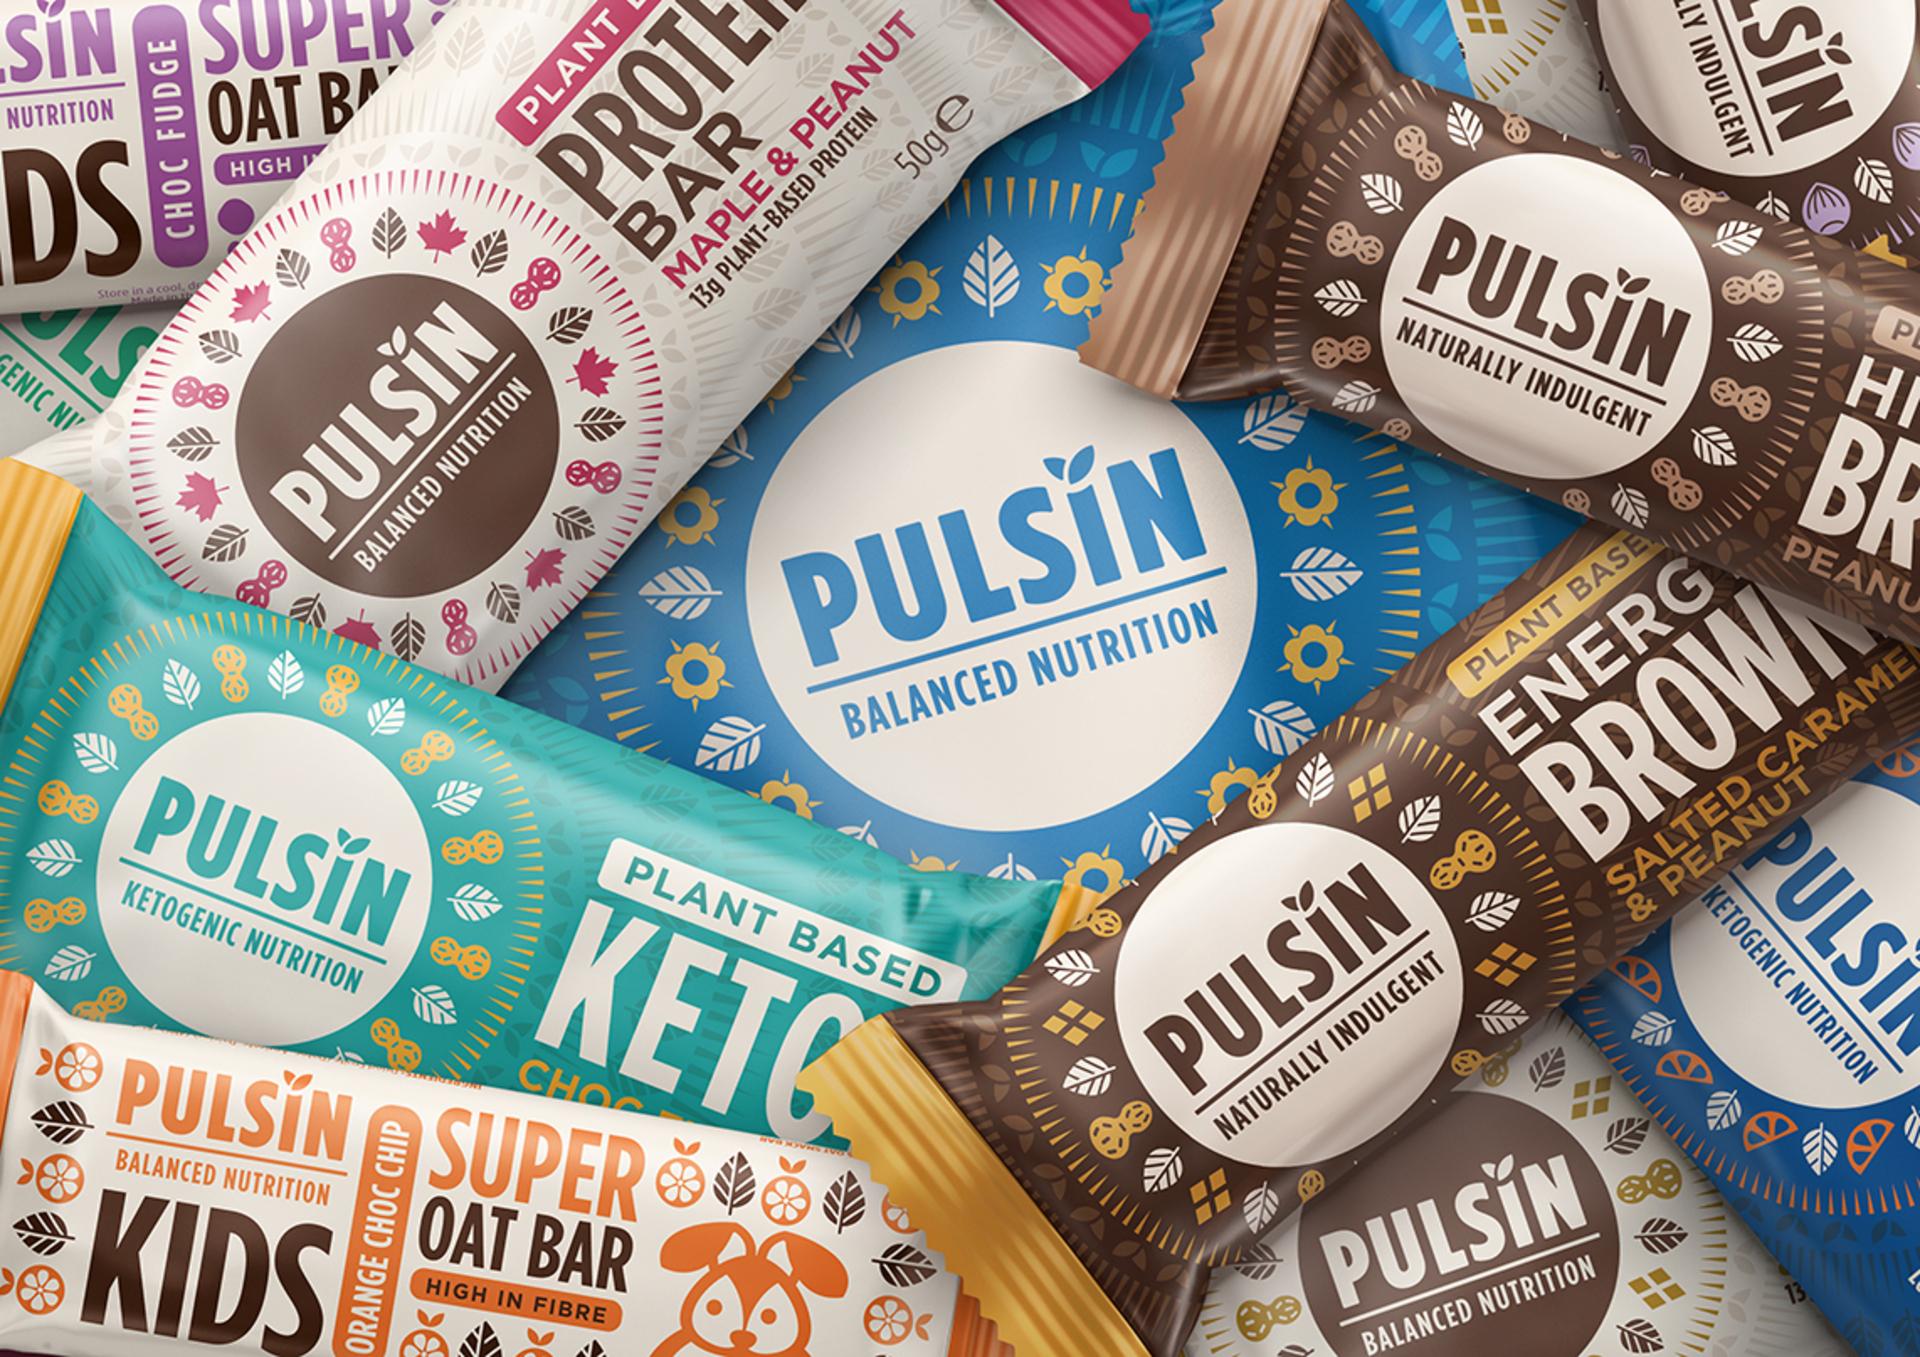 S-Ventures acquires Pulsin as health food push continues